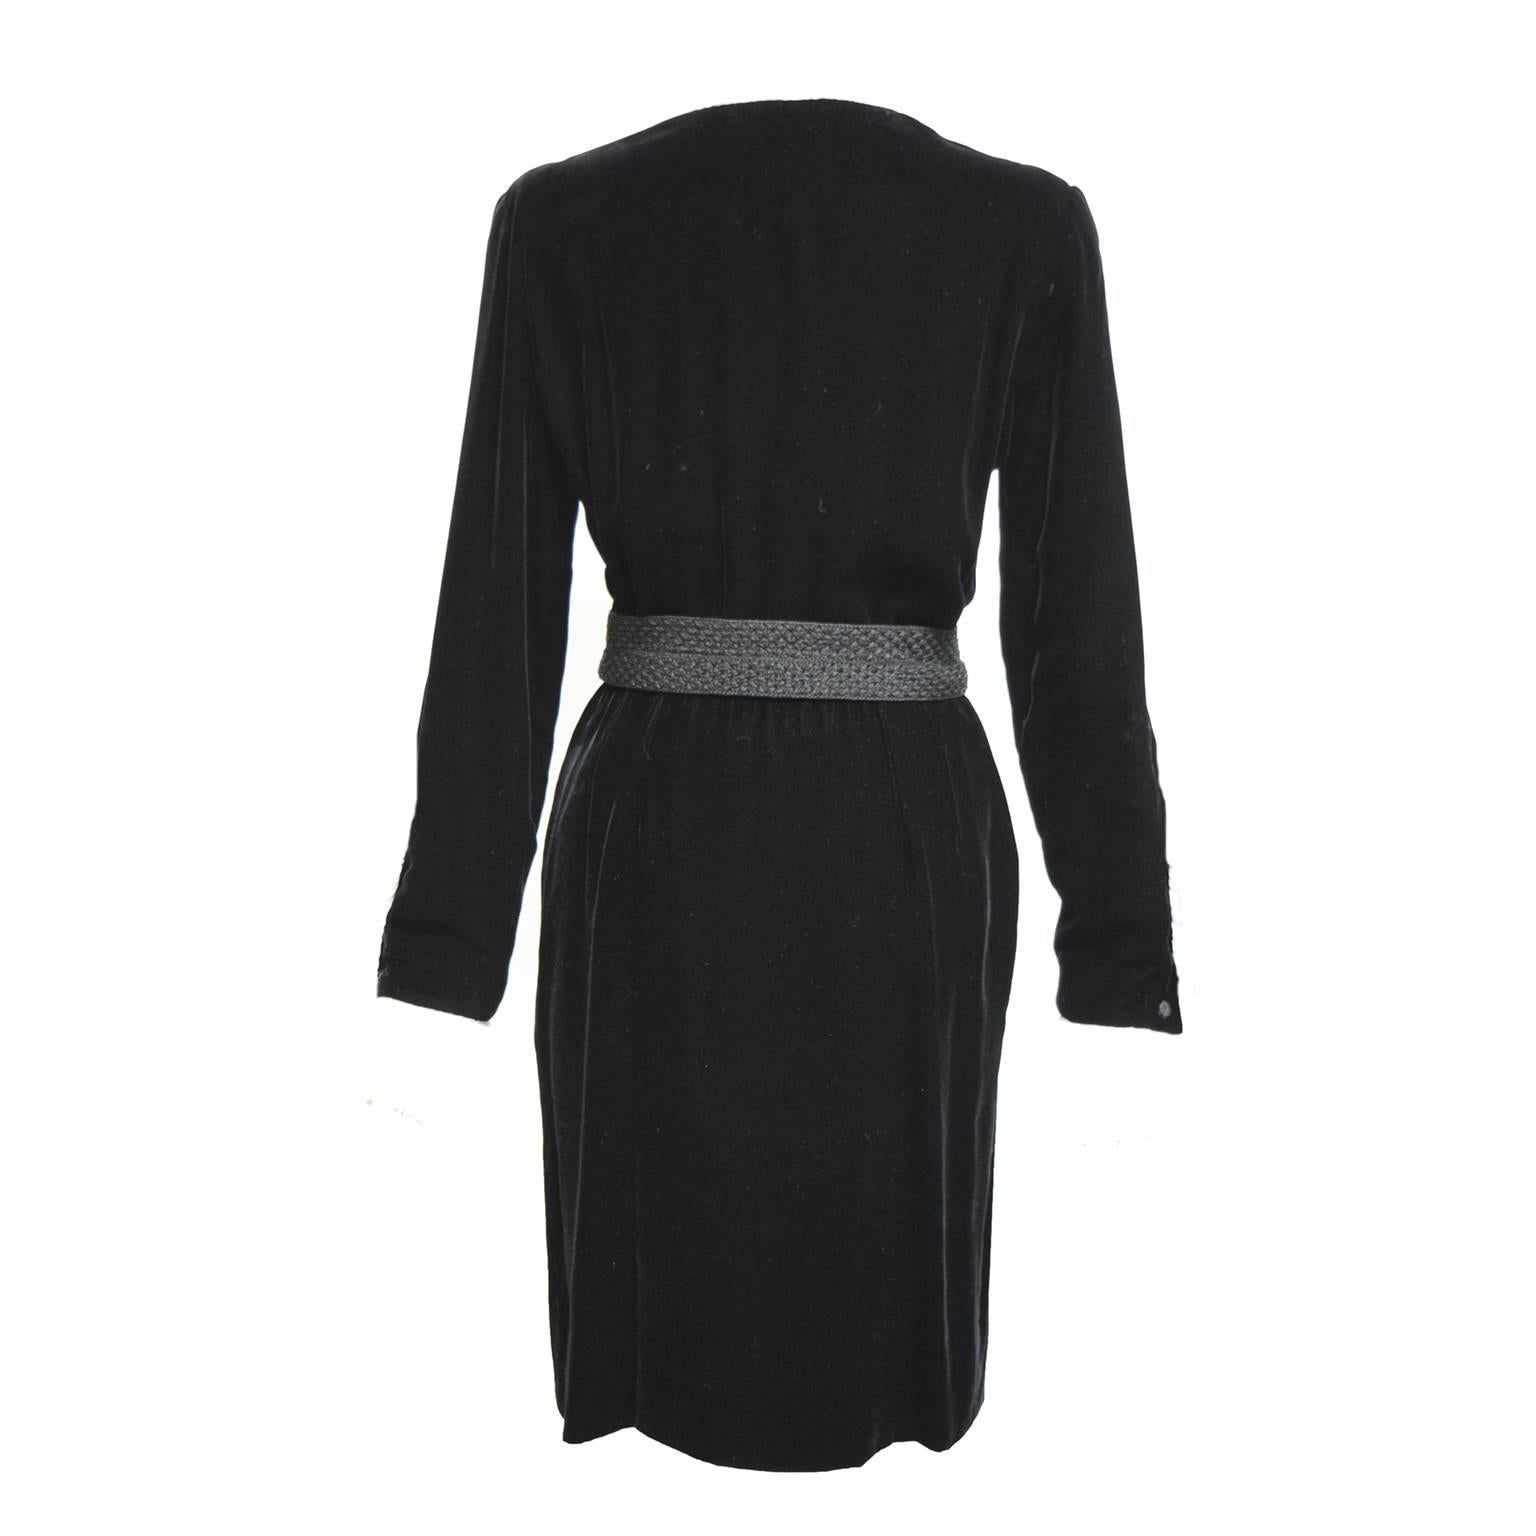 This fabulous Oscar de la Renta evening shirt dress is made from black silk velvet. This dress is fully lined and has white taffeta ruffled collar and sleeve cuffs. Tasseled and knitted waist belt. 